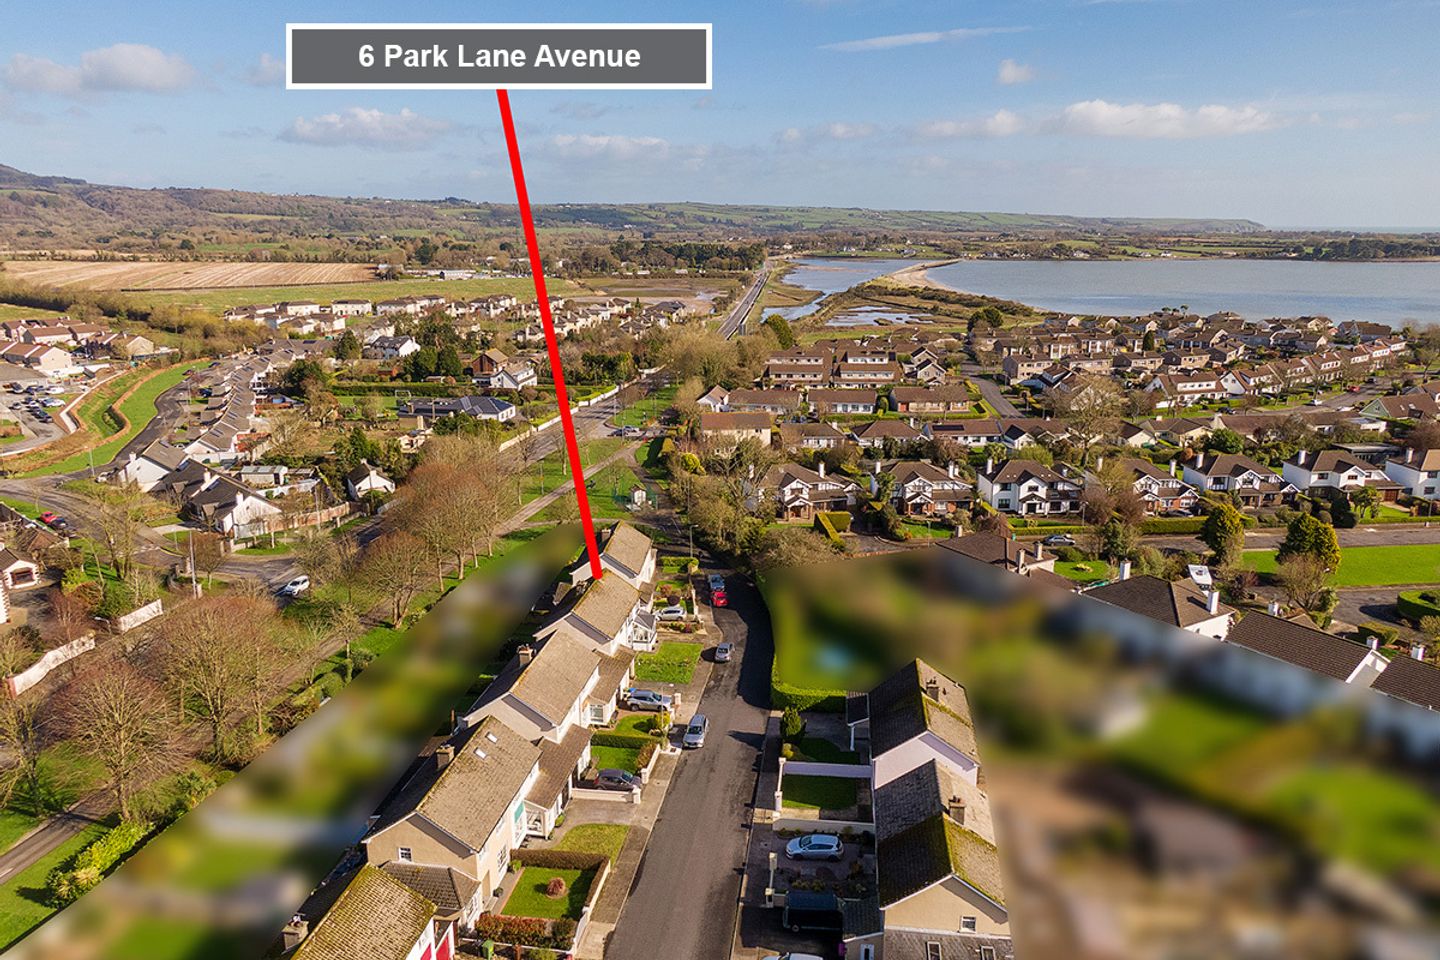 6 Park Lane Avenue, Abbeyside, Dungarvan, Co. Waterford, X35VY24